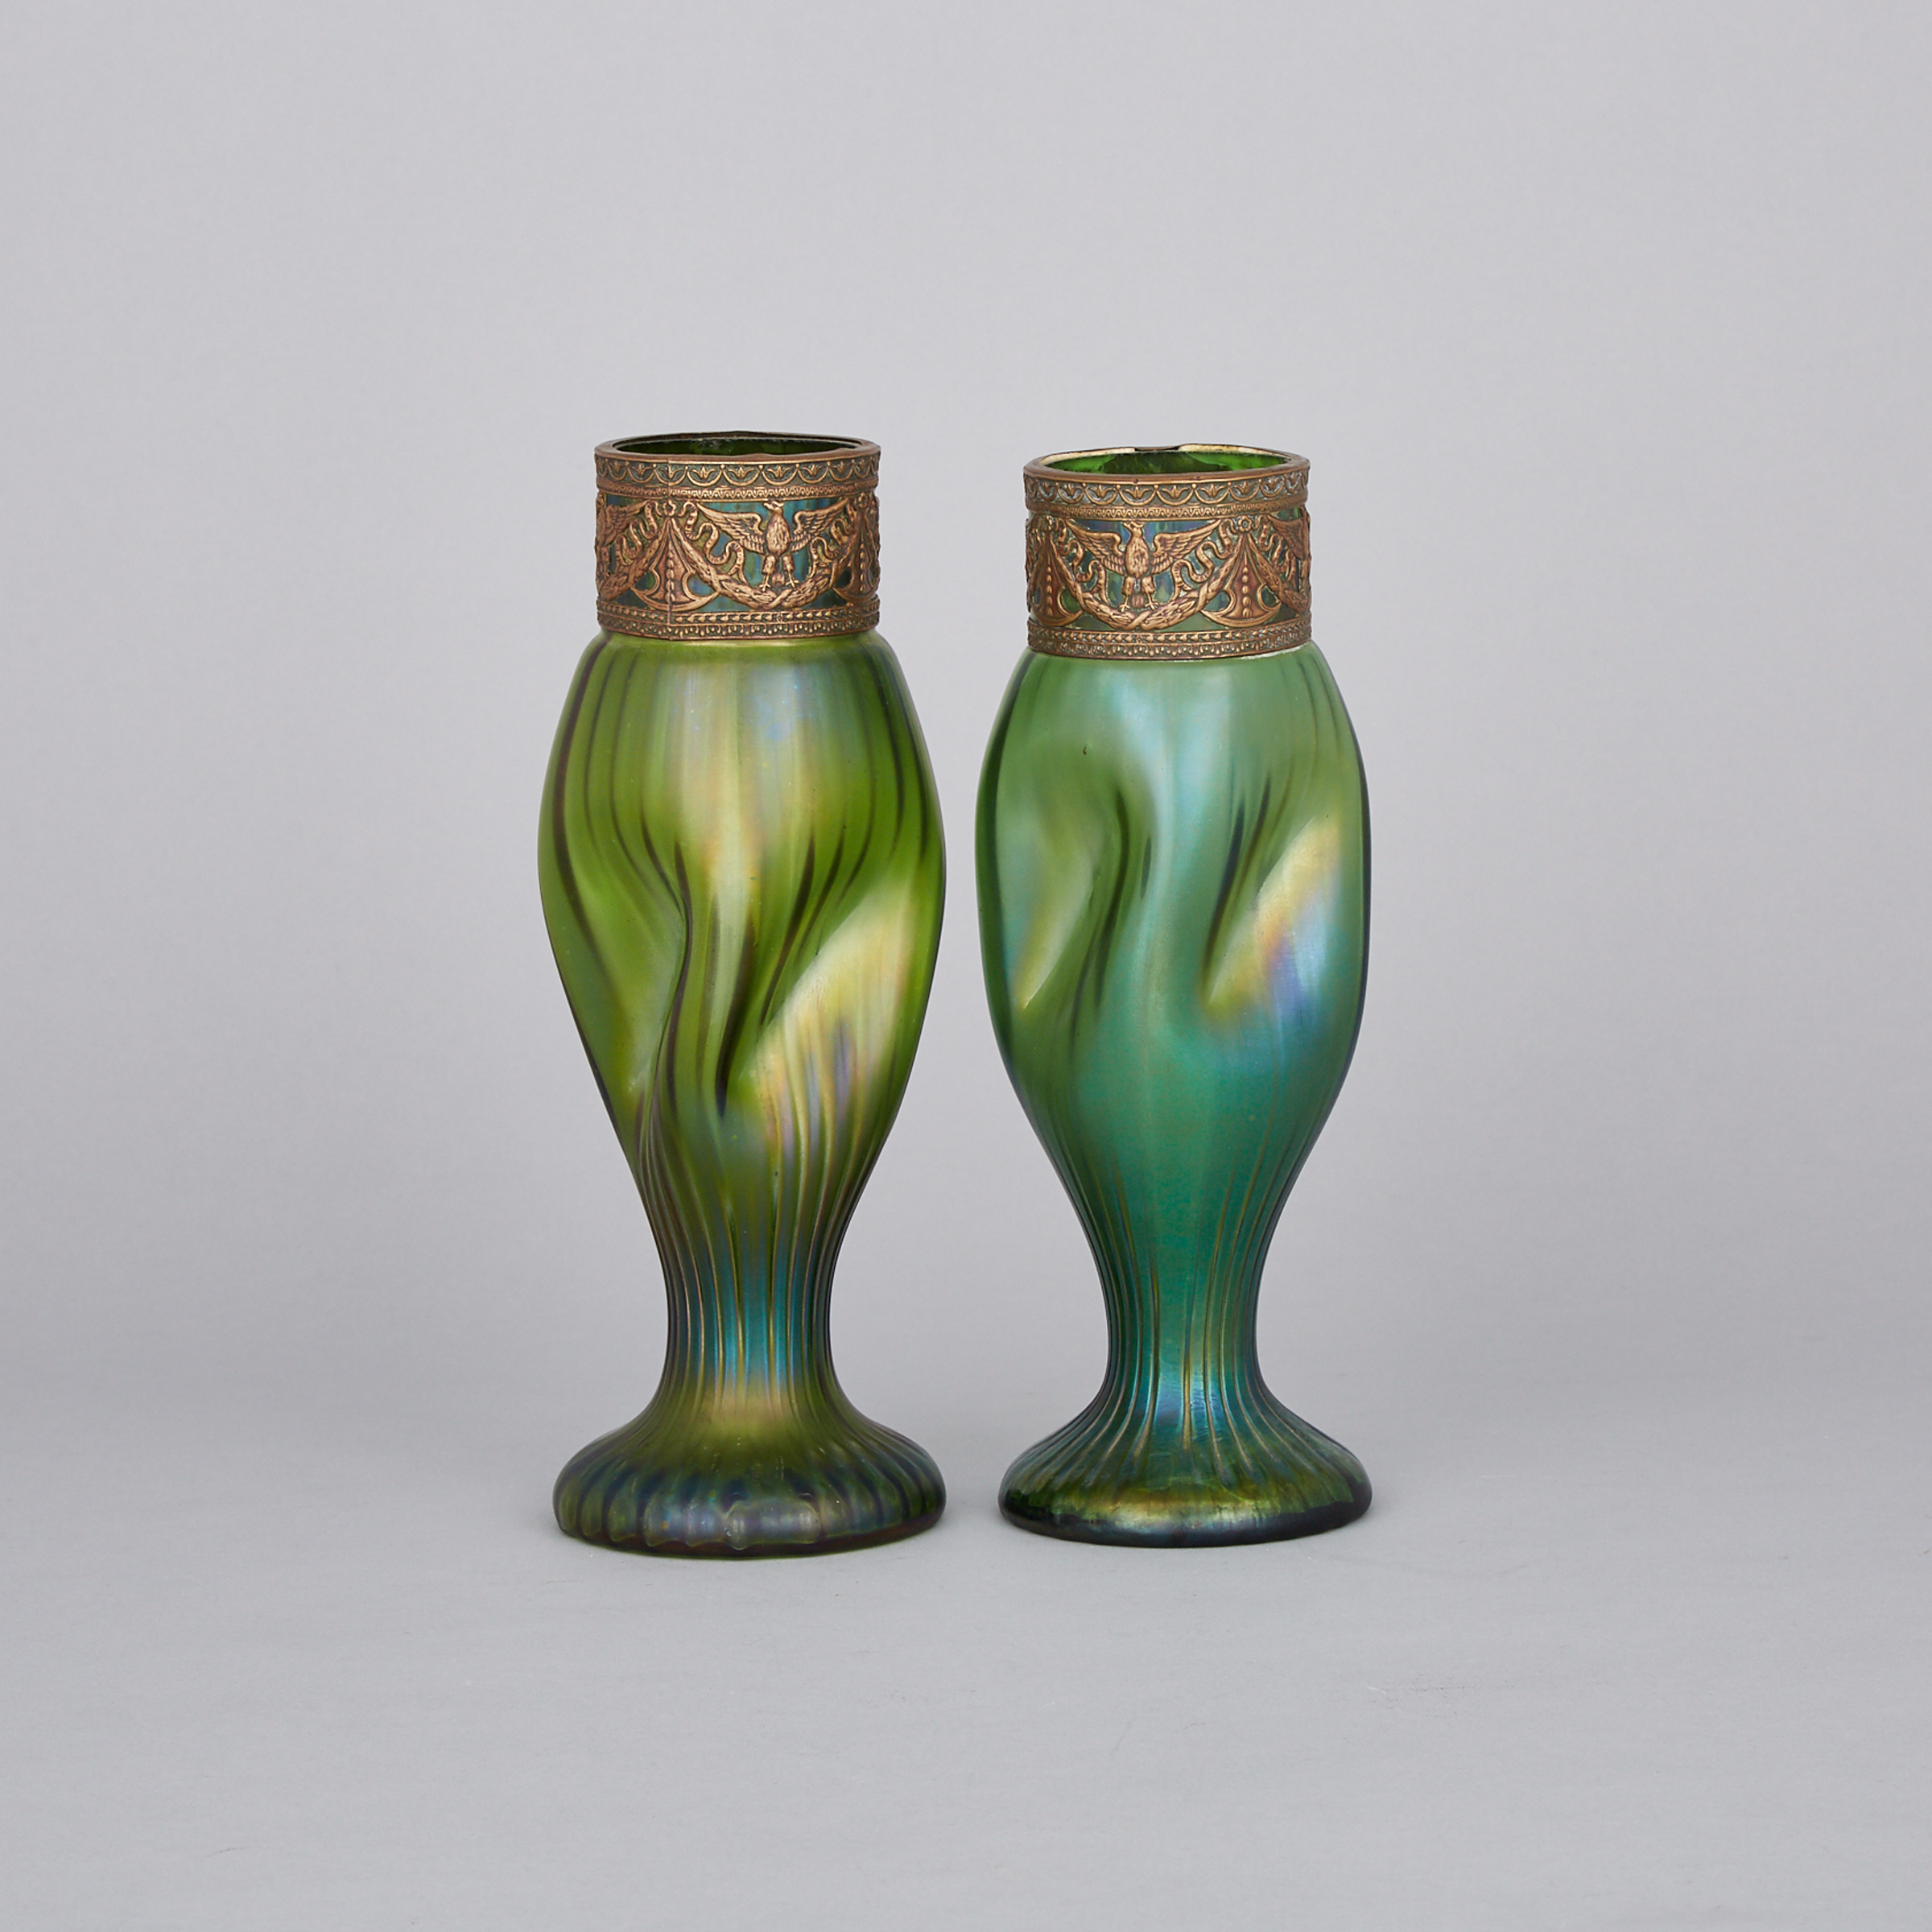 Pair of Bohemian Patinated Metal Mounted Iridescent Green Glass Vases, c.1900